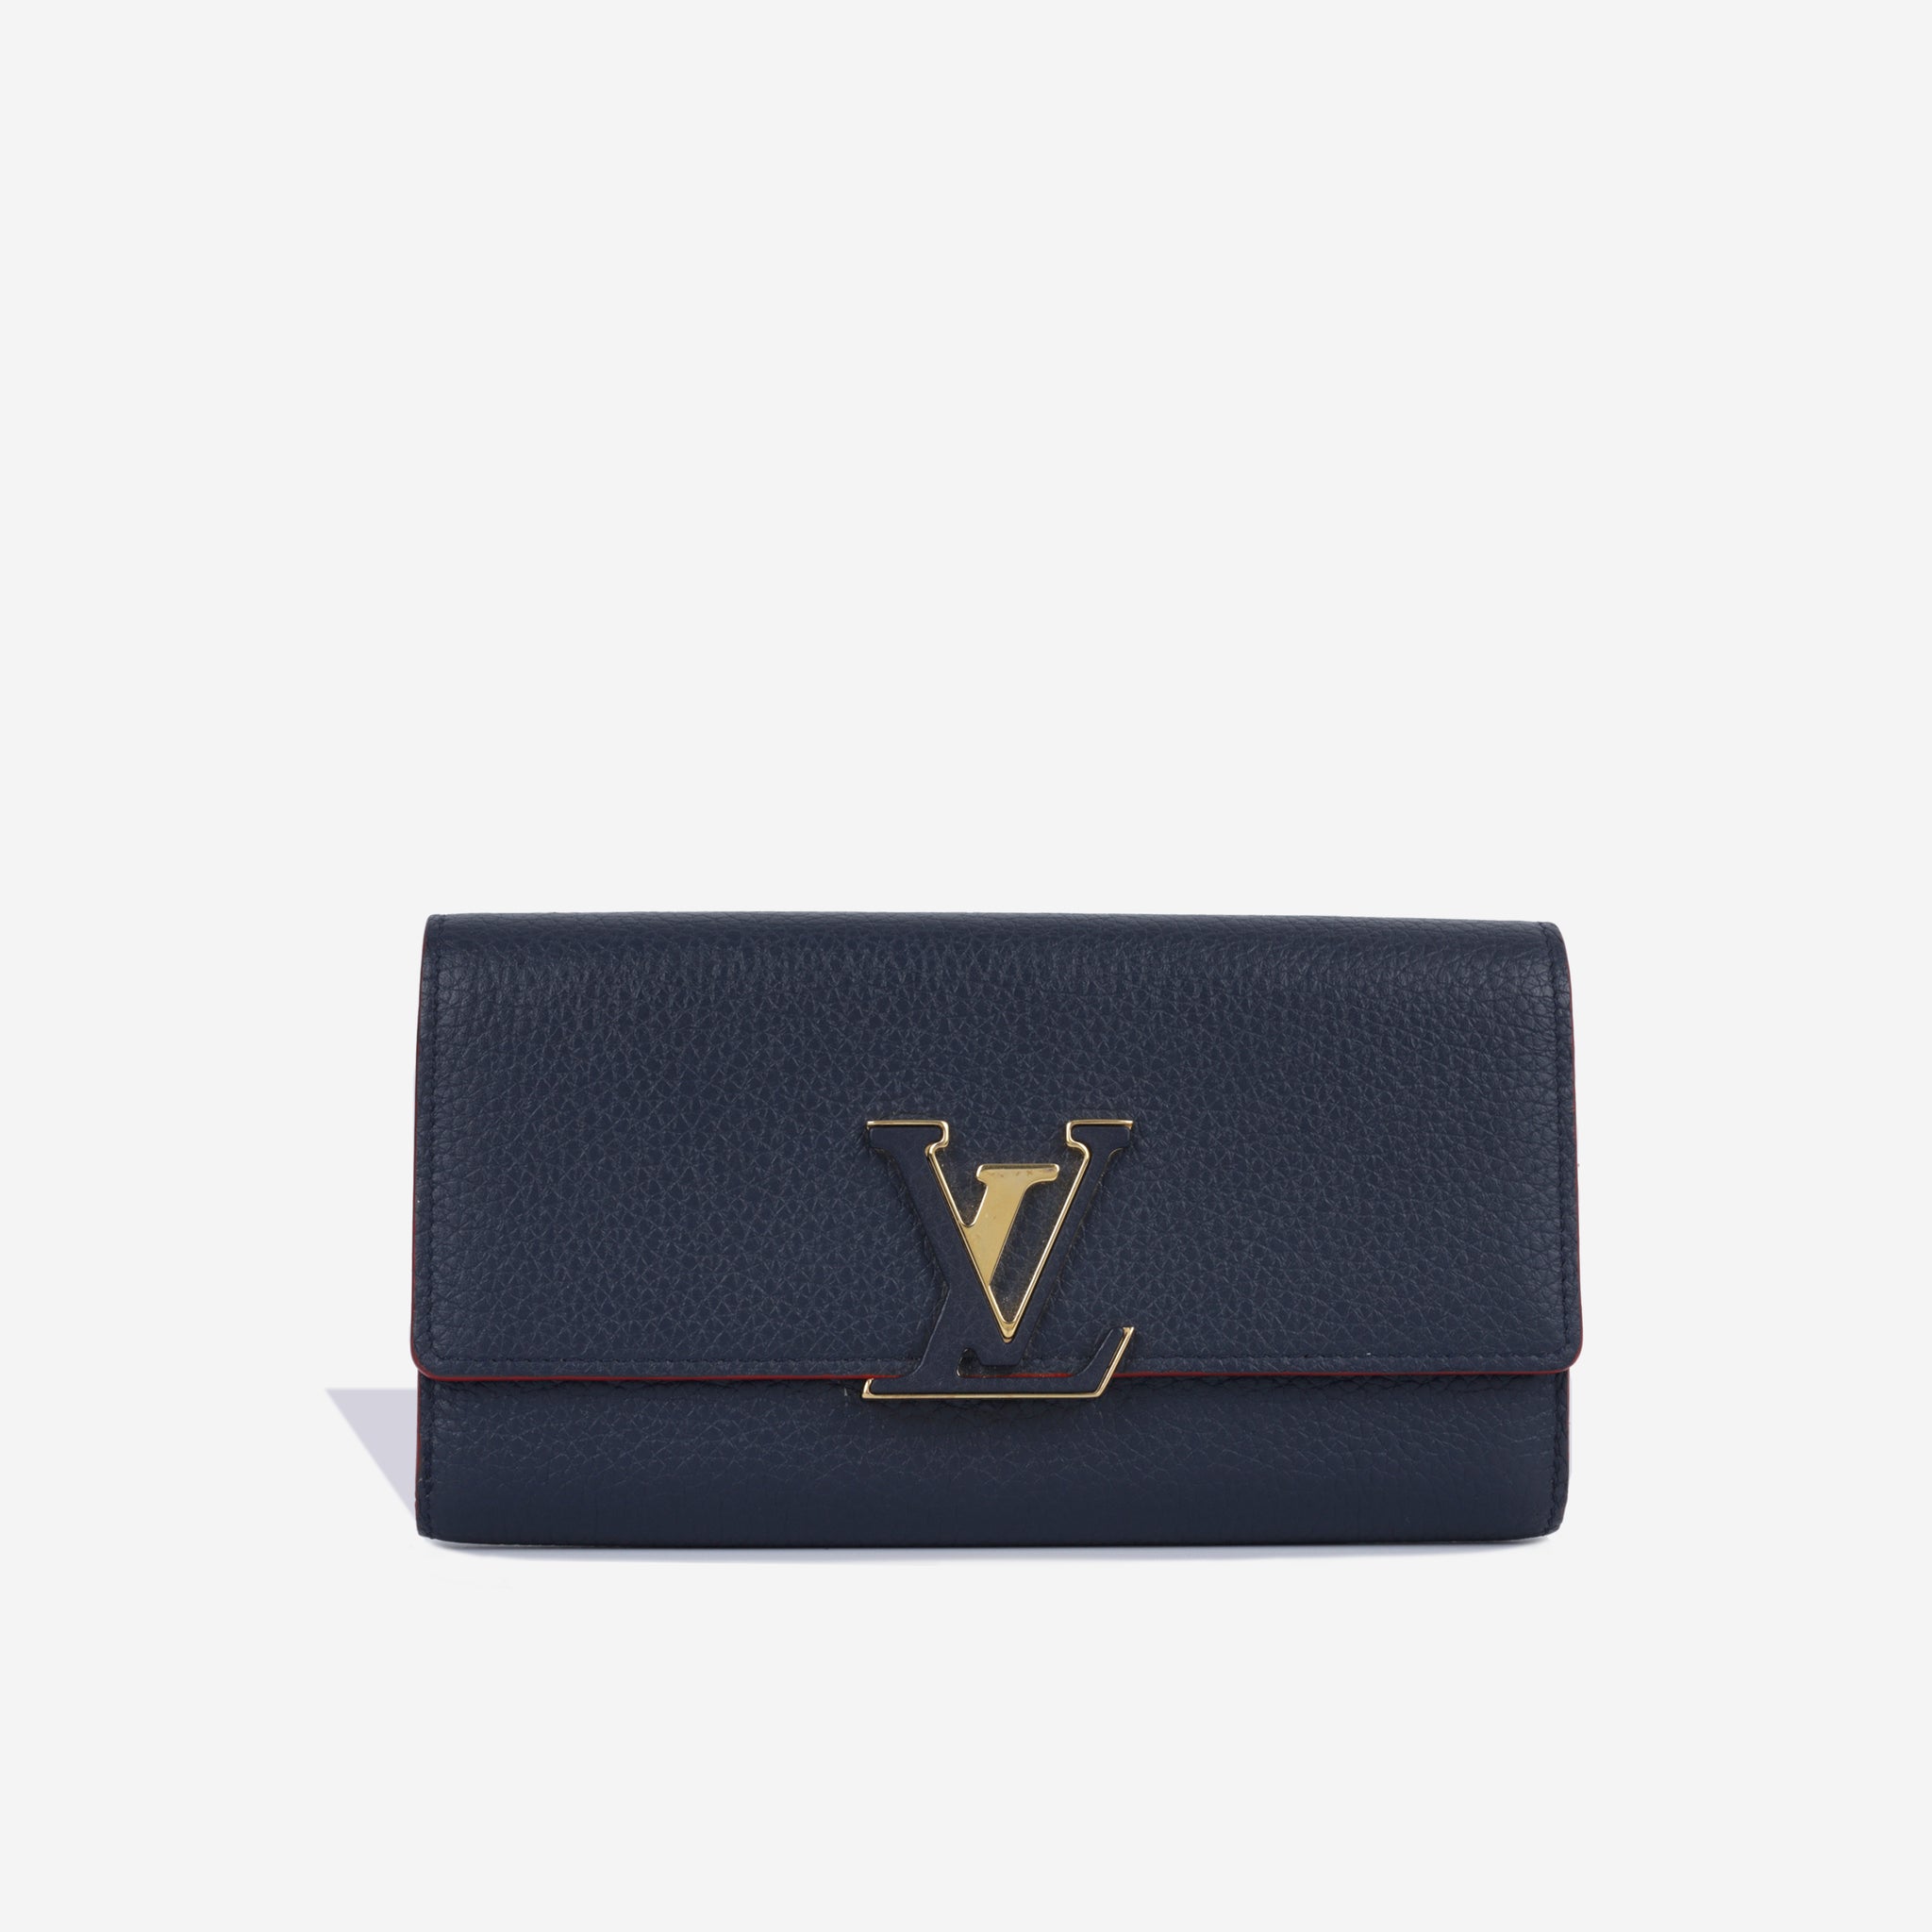 Louis Vuitton Marine Rouge Taurillion Leather Capucines Compact